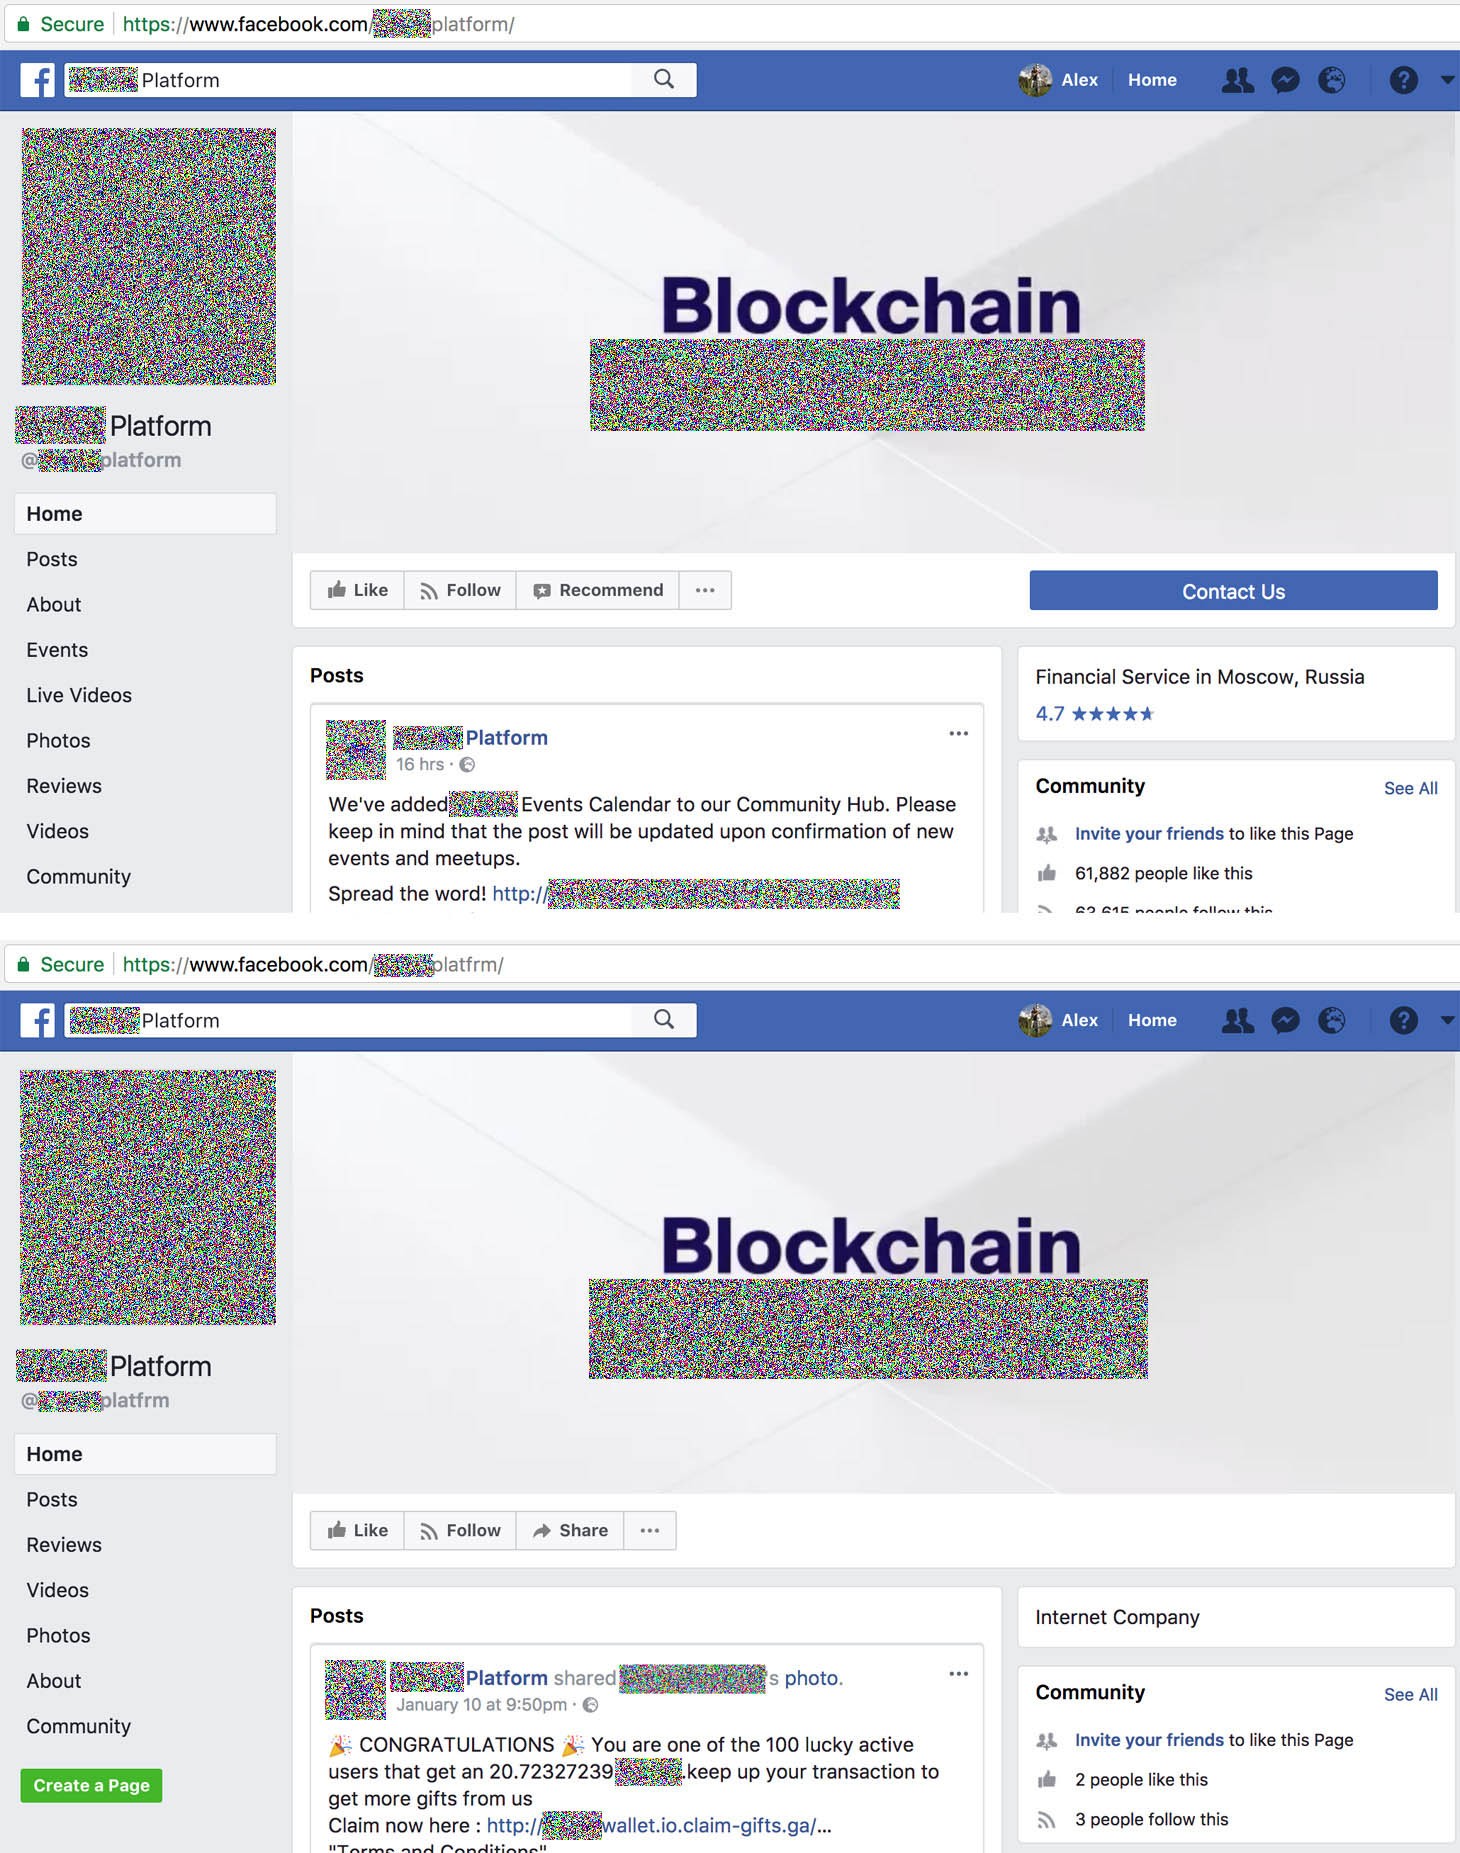 The genuine Facebook page of a cryptoplatform — and a fake one